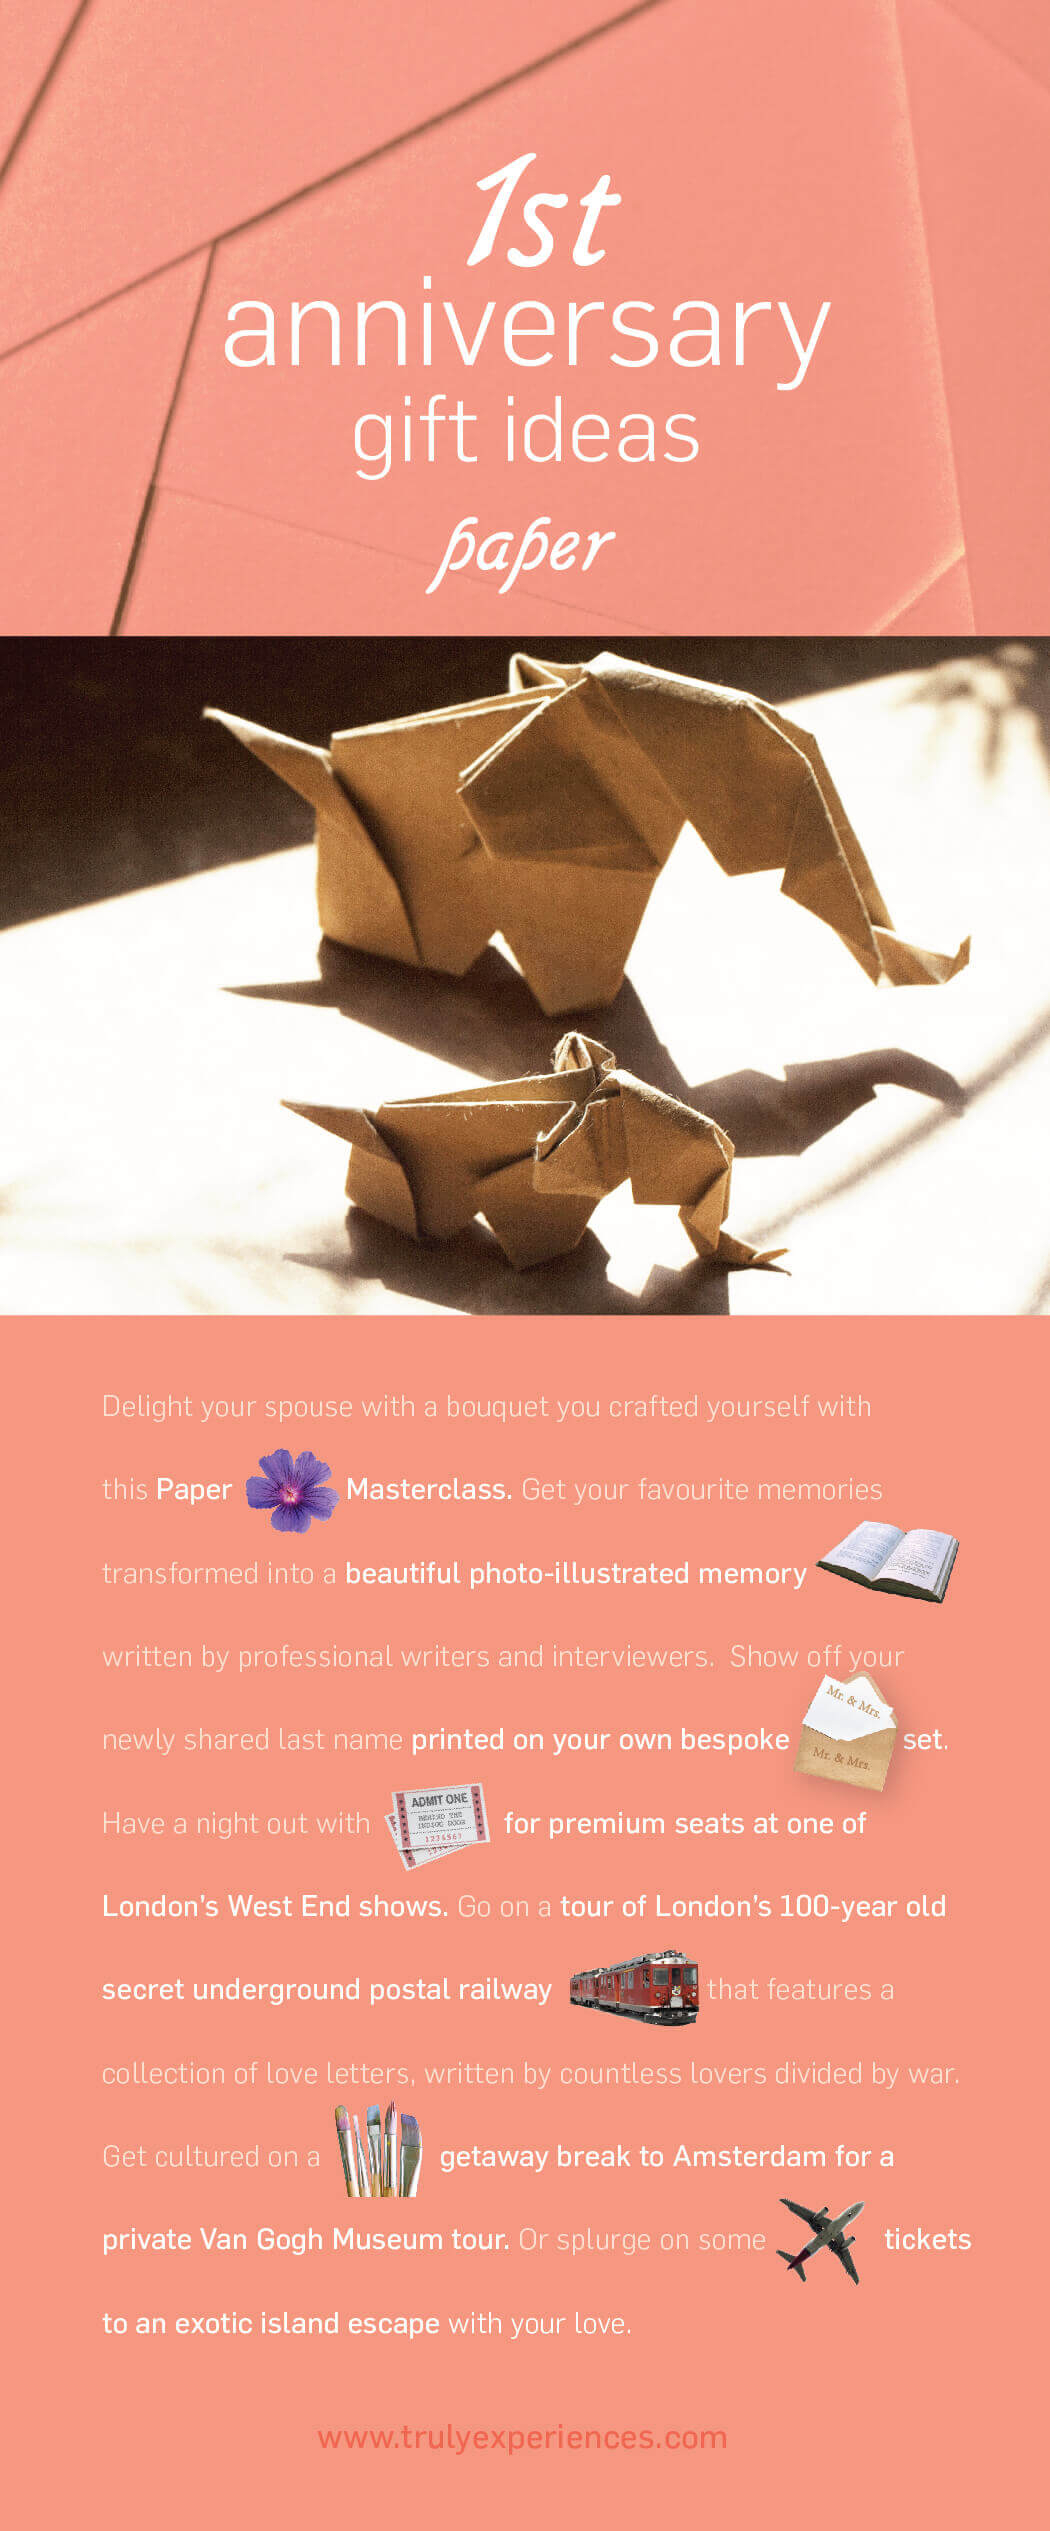 Origami Gifts For Her Passions On Paper 1st Wedding Anniversary Gift Ideas